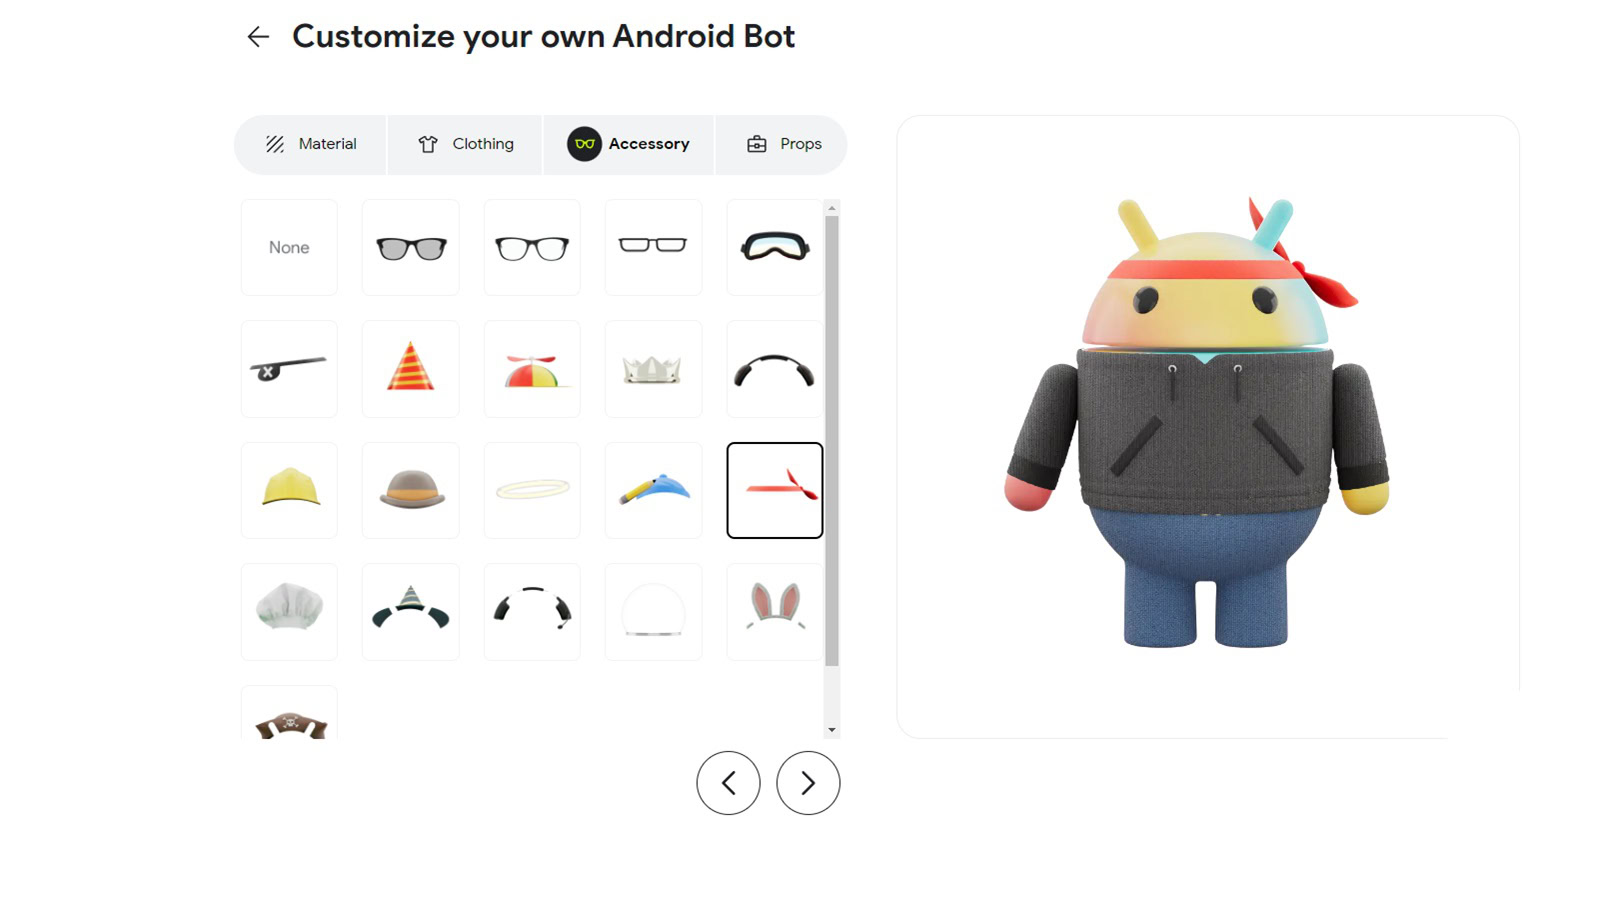 Google Bot Builder accessory selection